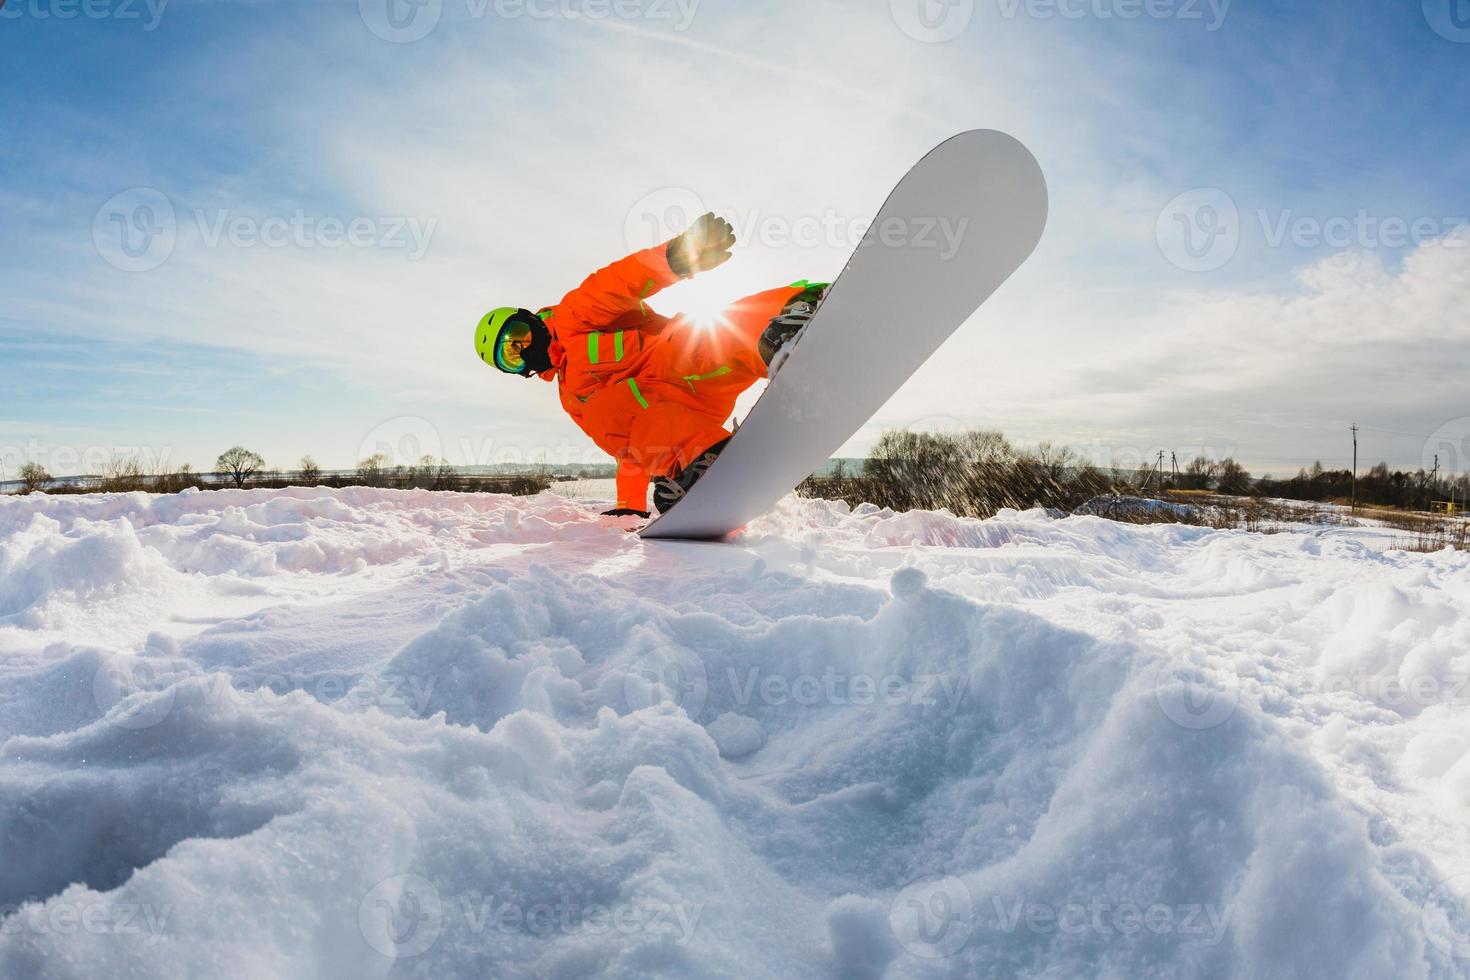 Snowboarder doing a trick on the ski slope photo